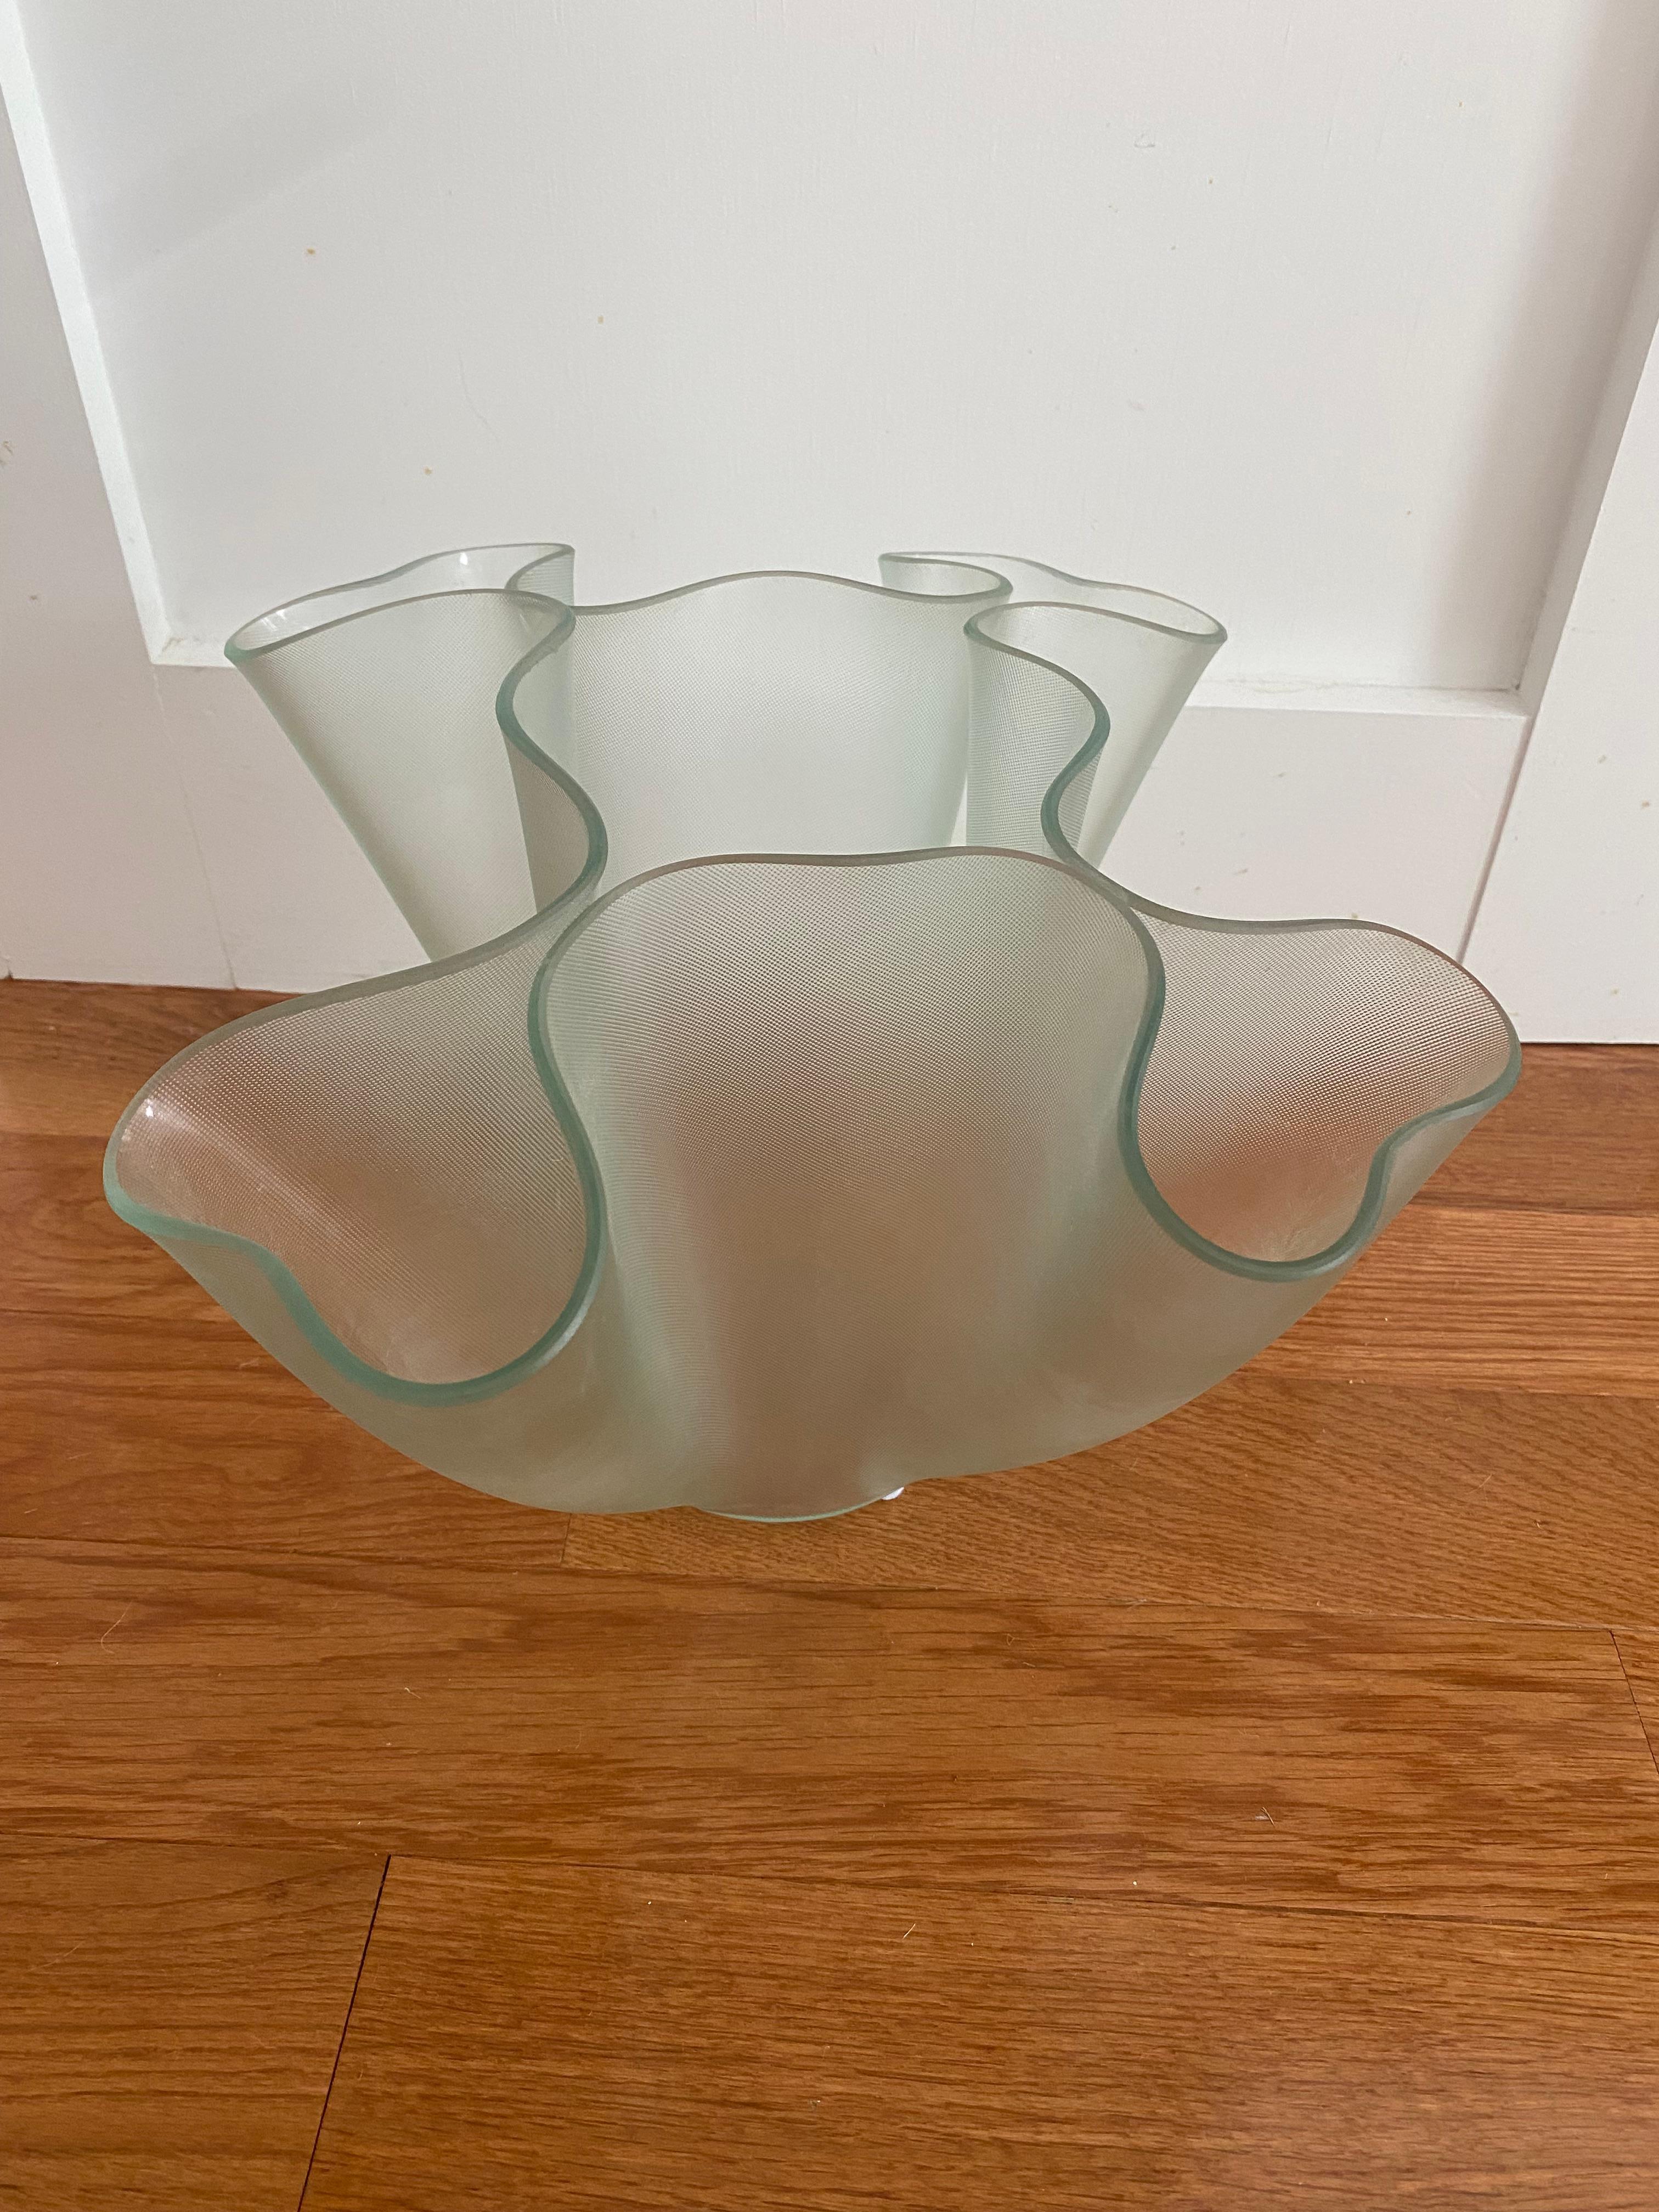 Free form textured glass vase designed from 1940s and in production since.
Fontana Arte iconic form for easy floral arrangement.
approx 13 x 13 x 9 inches high